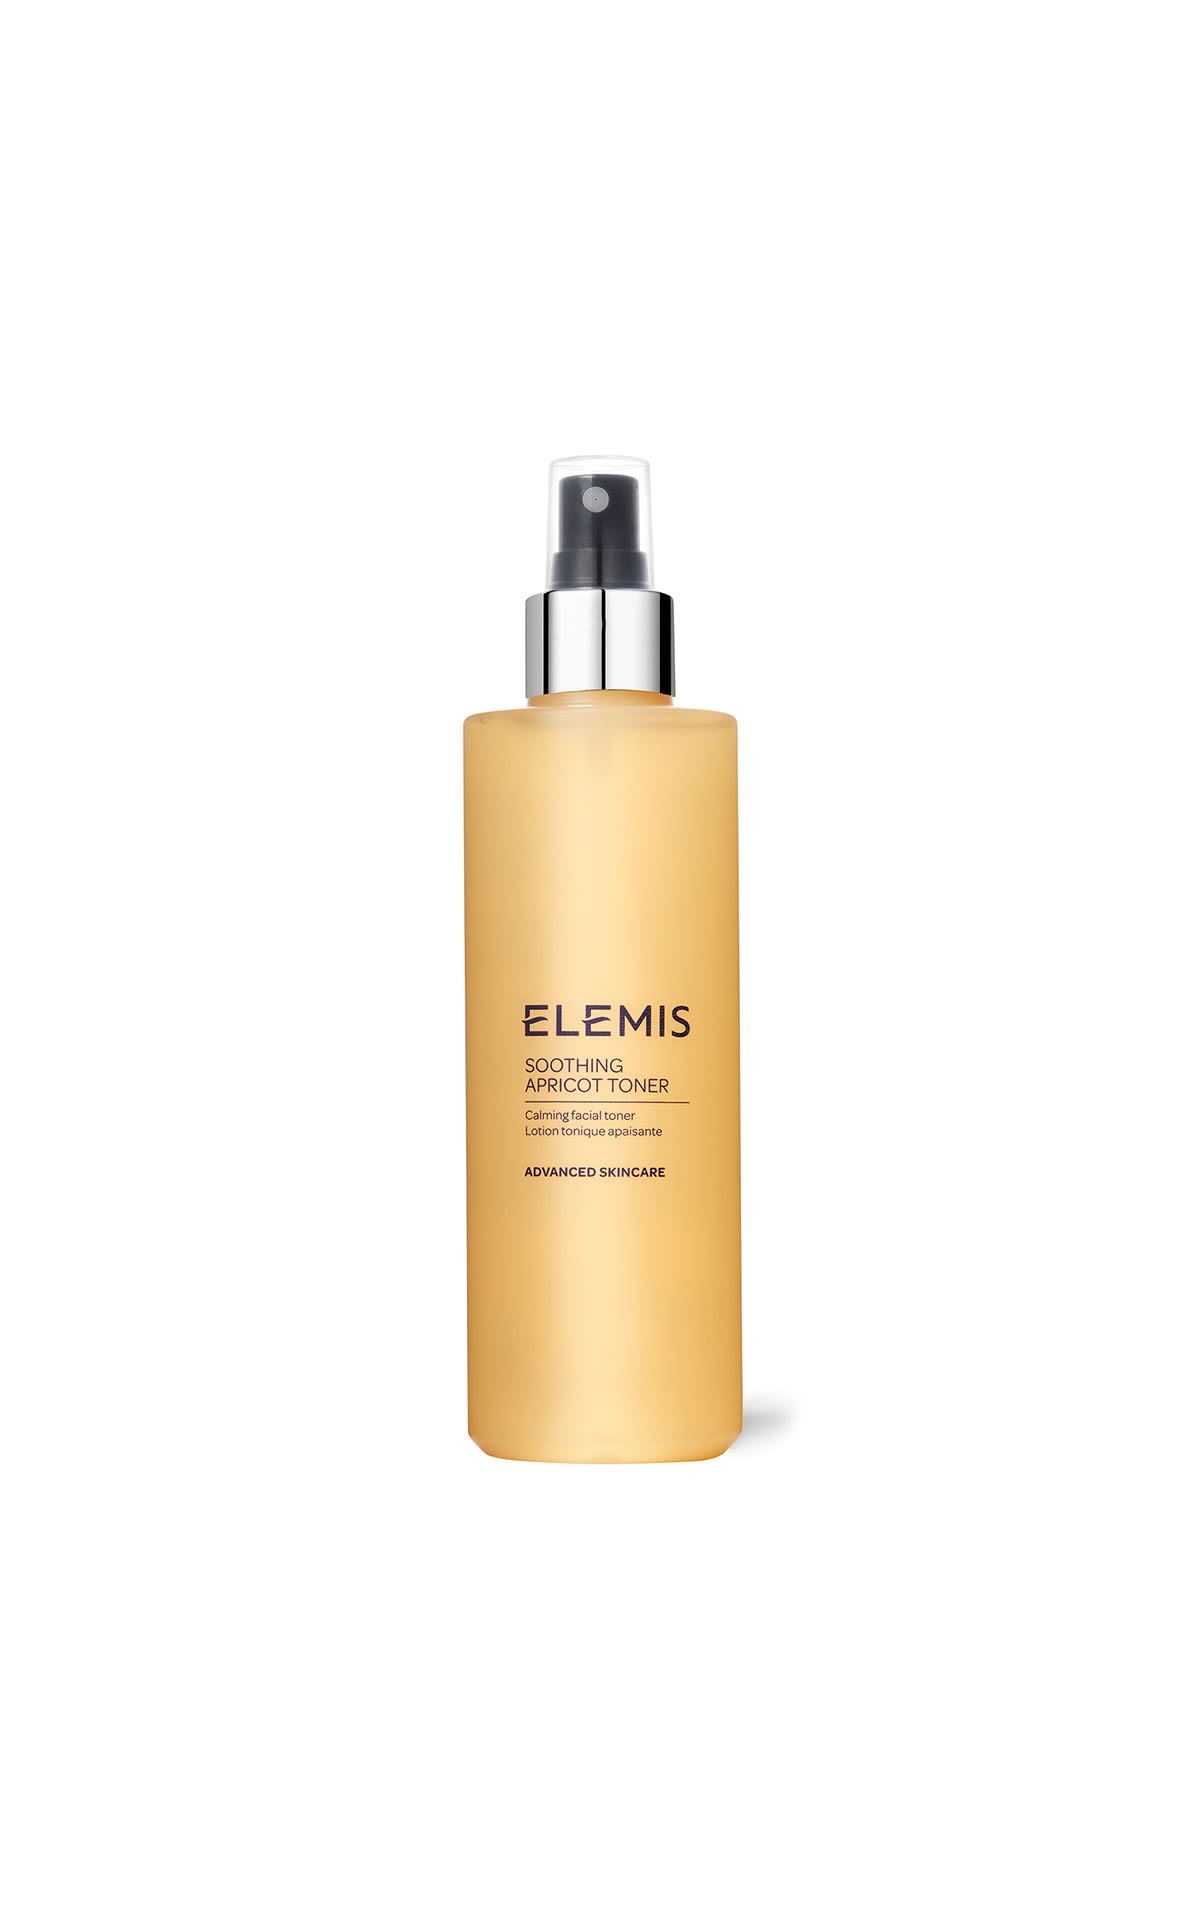 Elemis Soothing apricot toner from Bicester Village